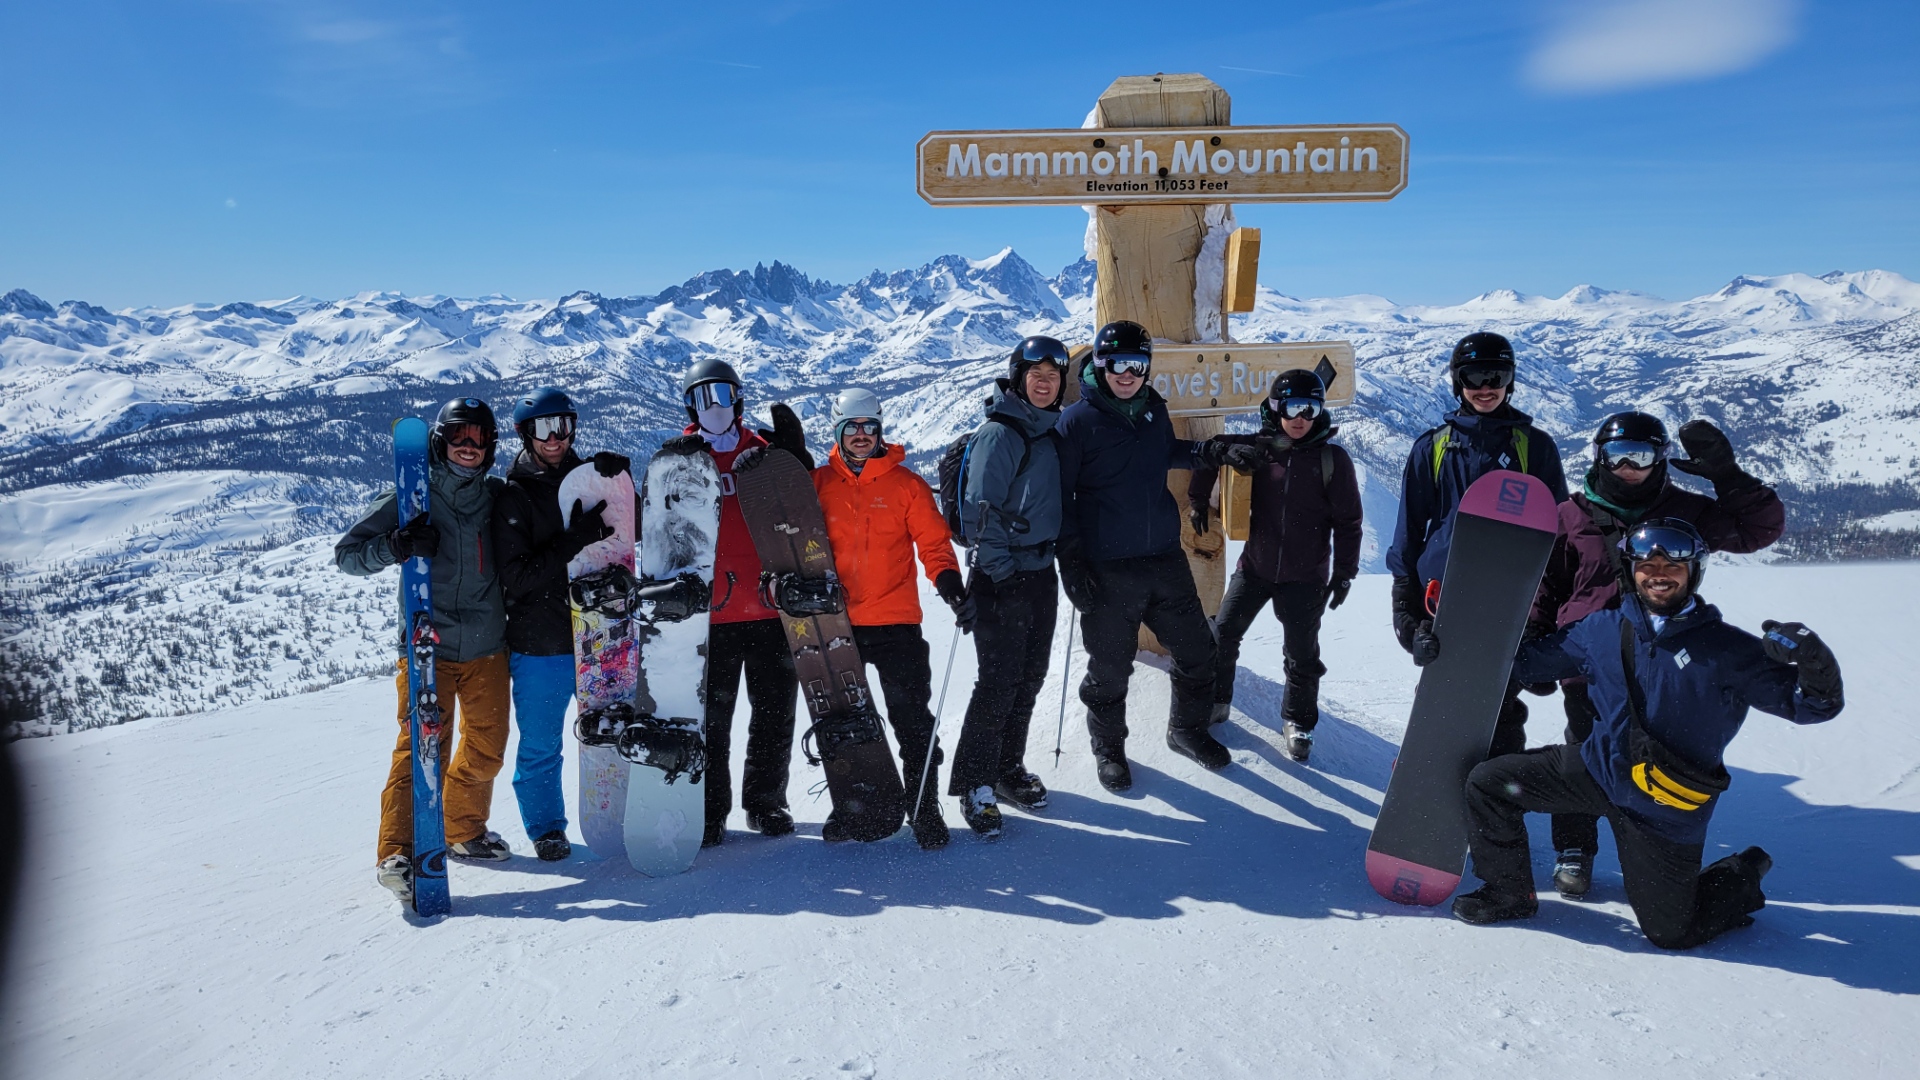 A group of people at Mammoth Mountain